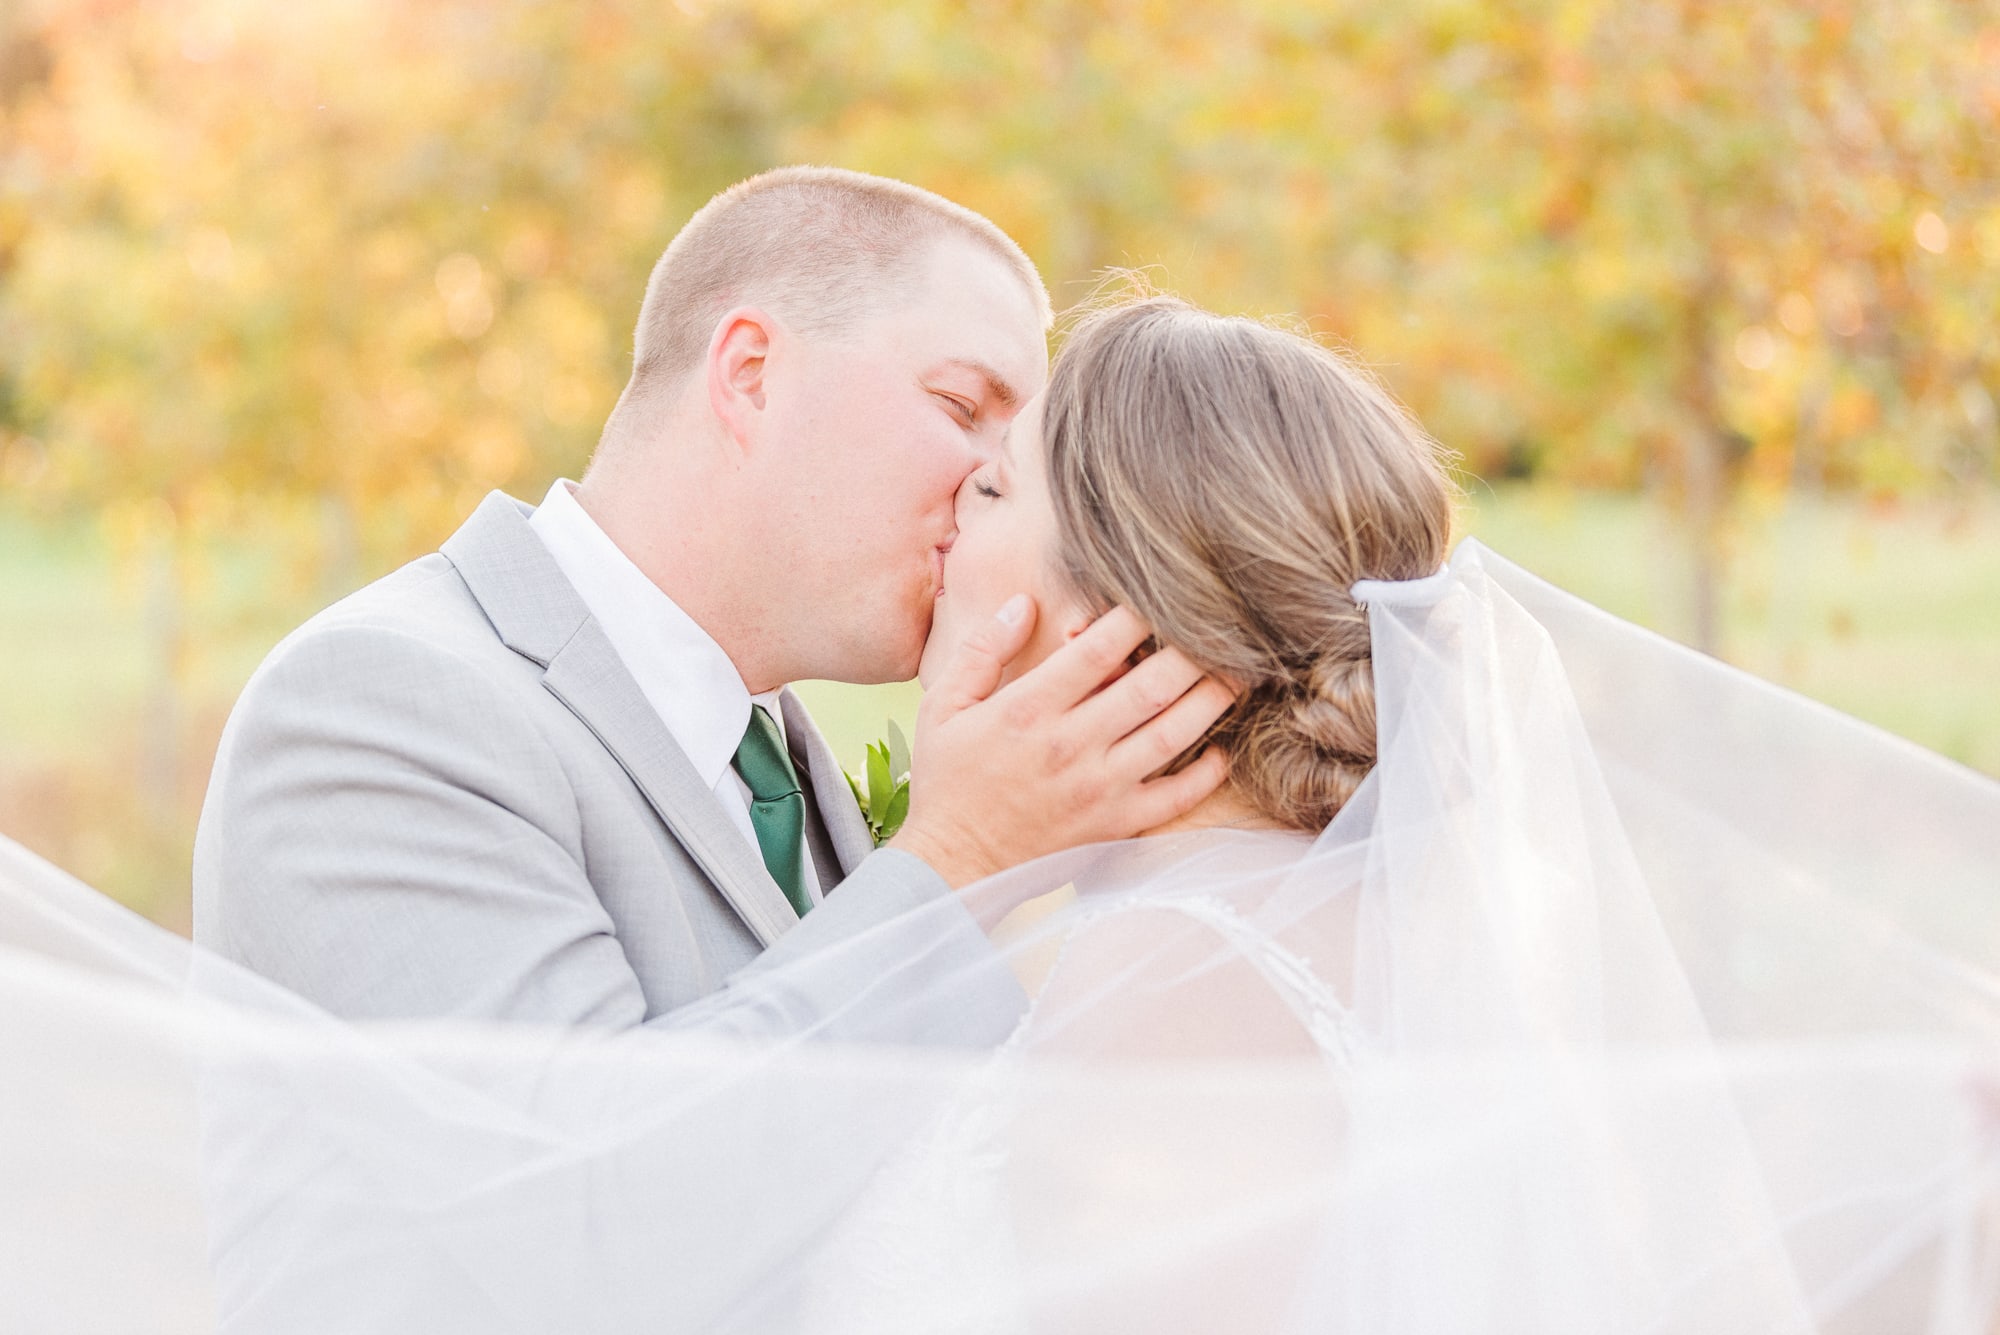 The veils swirls around the kissing couple and the fall colors of the Low Meadows Estate are seen in the background.